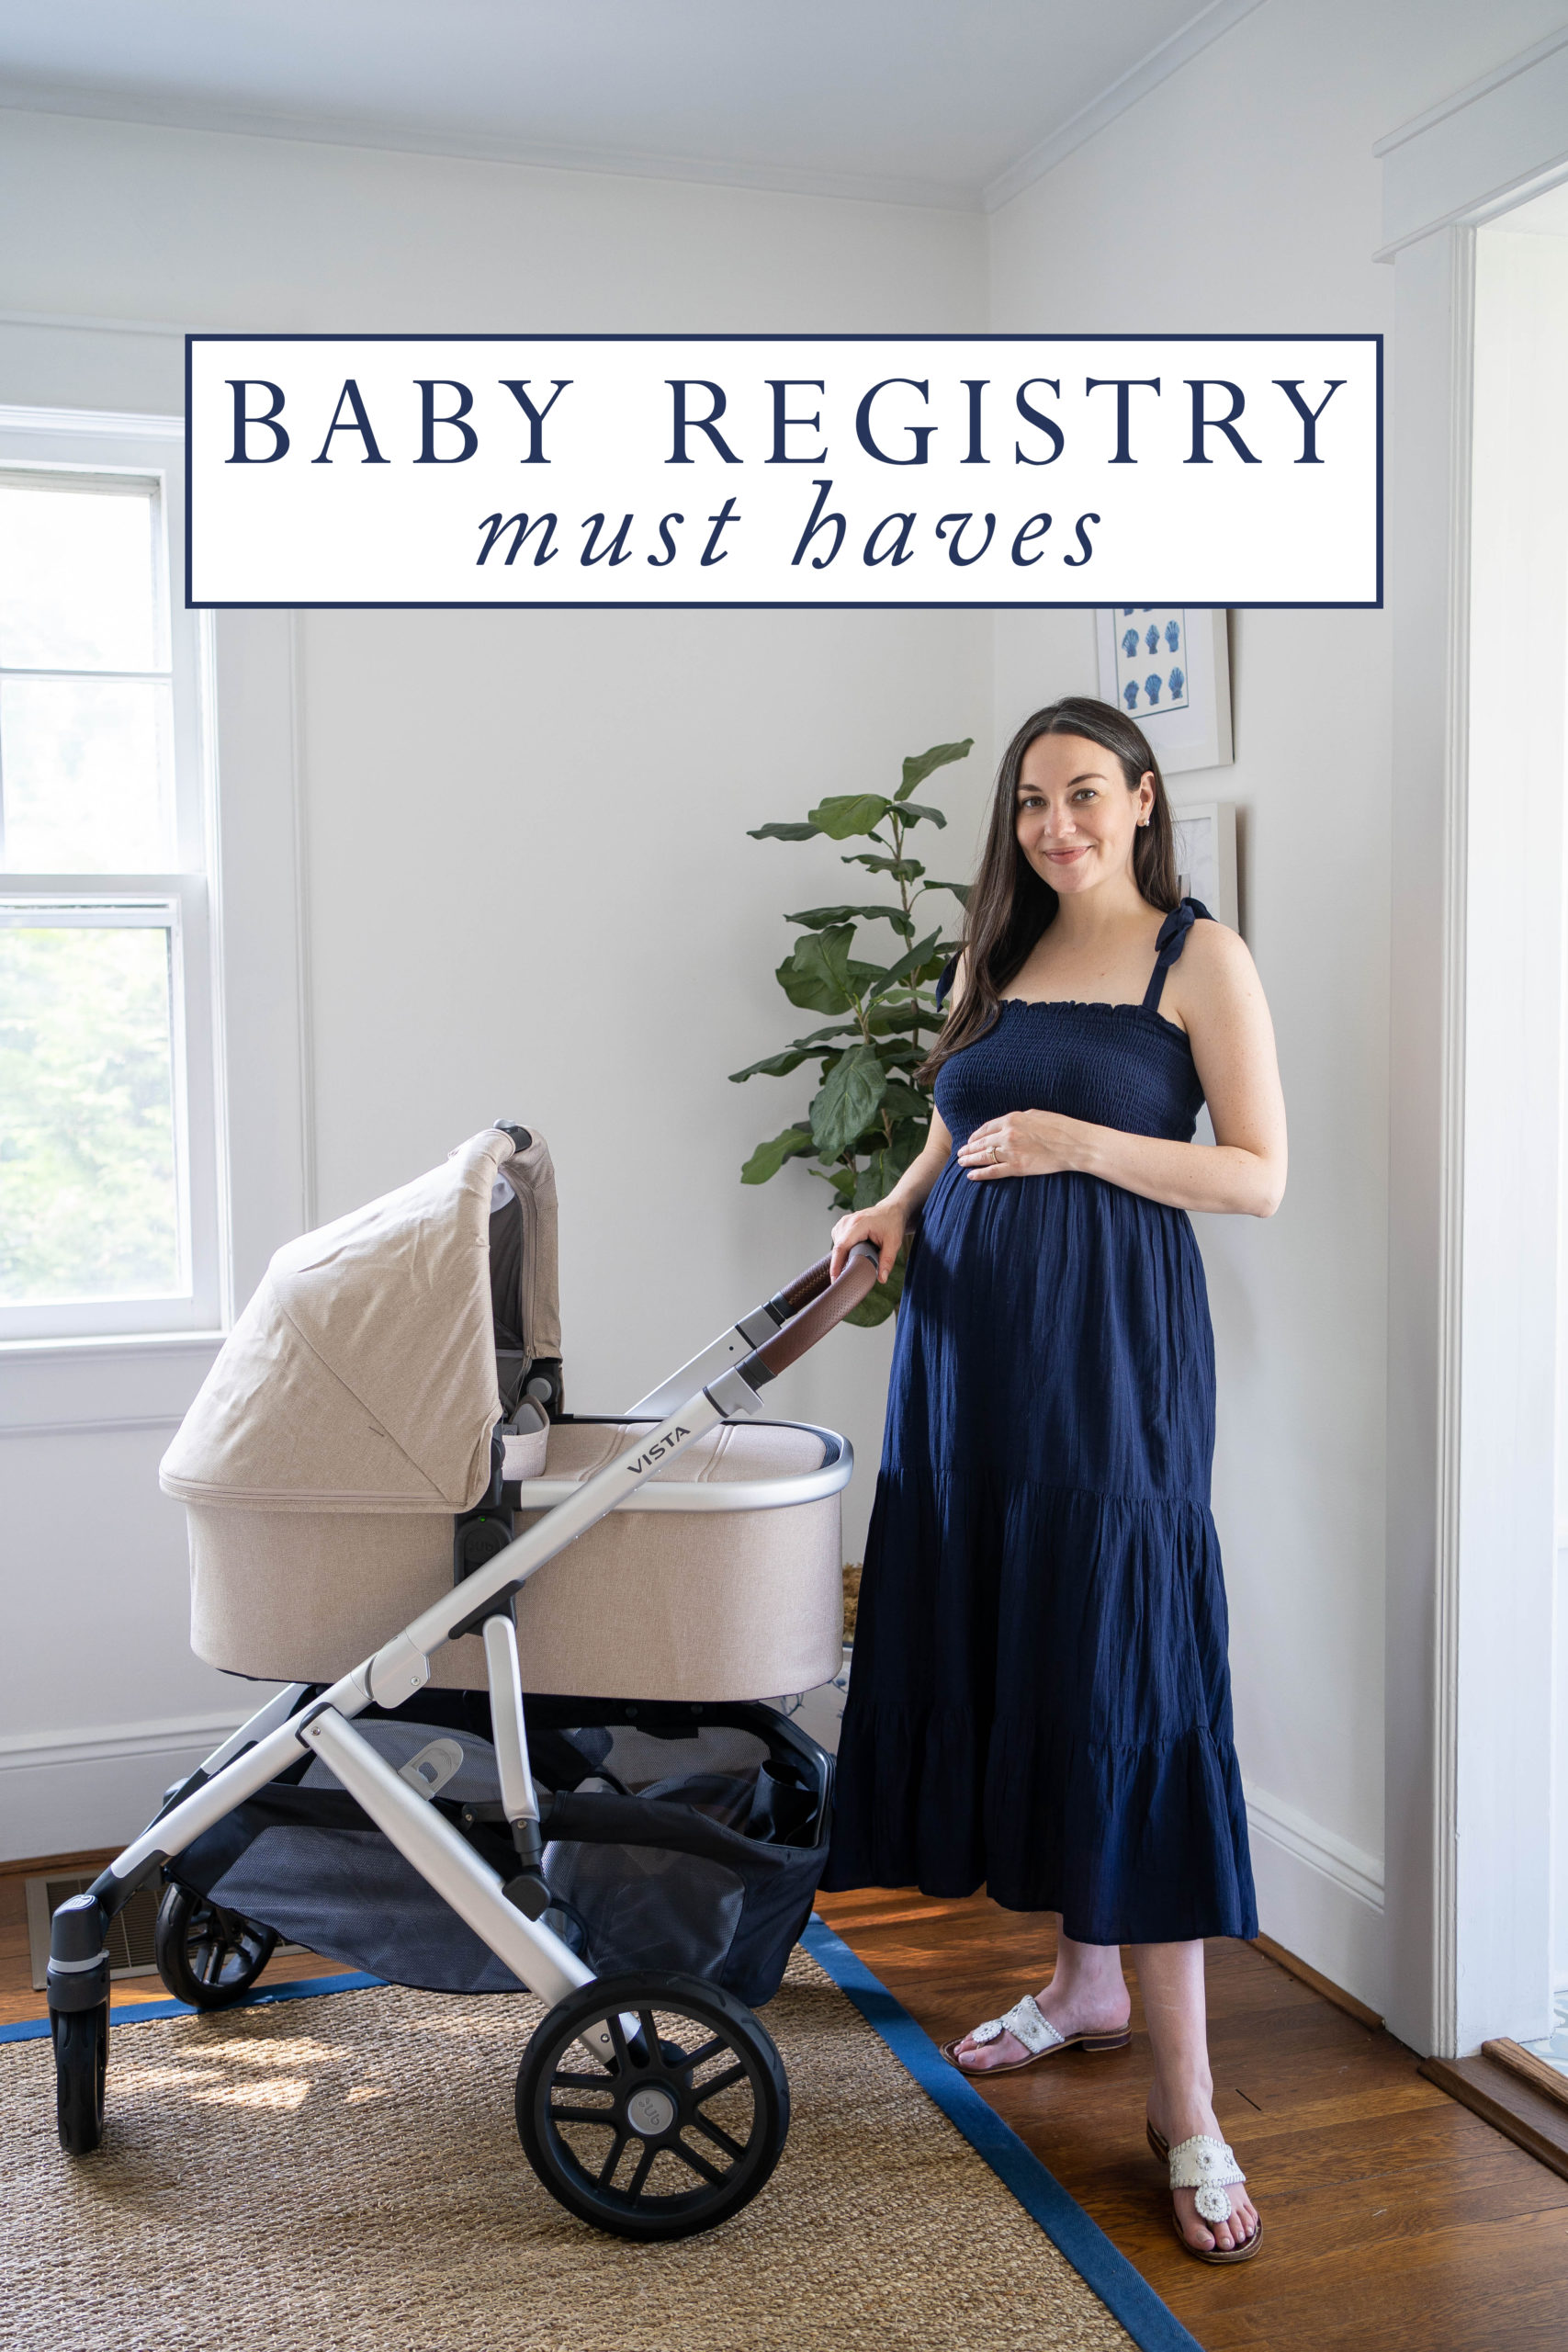 Must register baby items you need for your baby shower